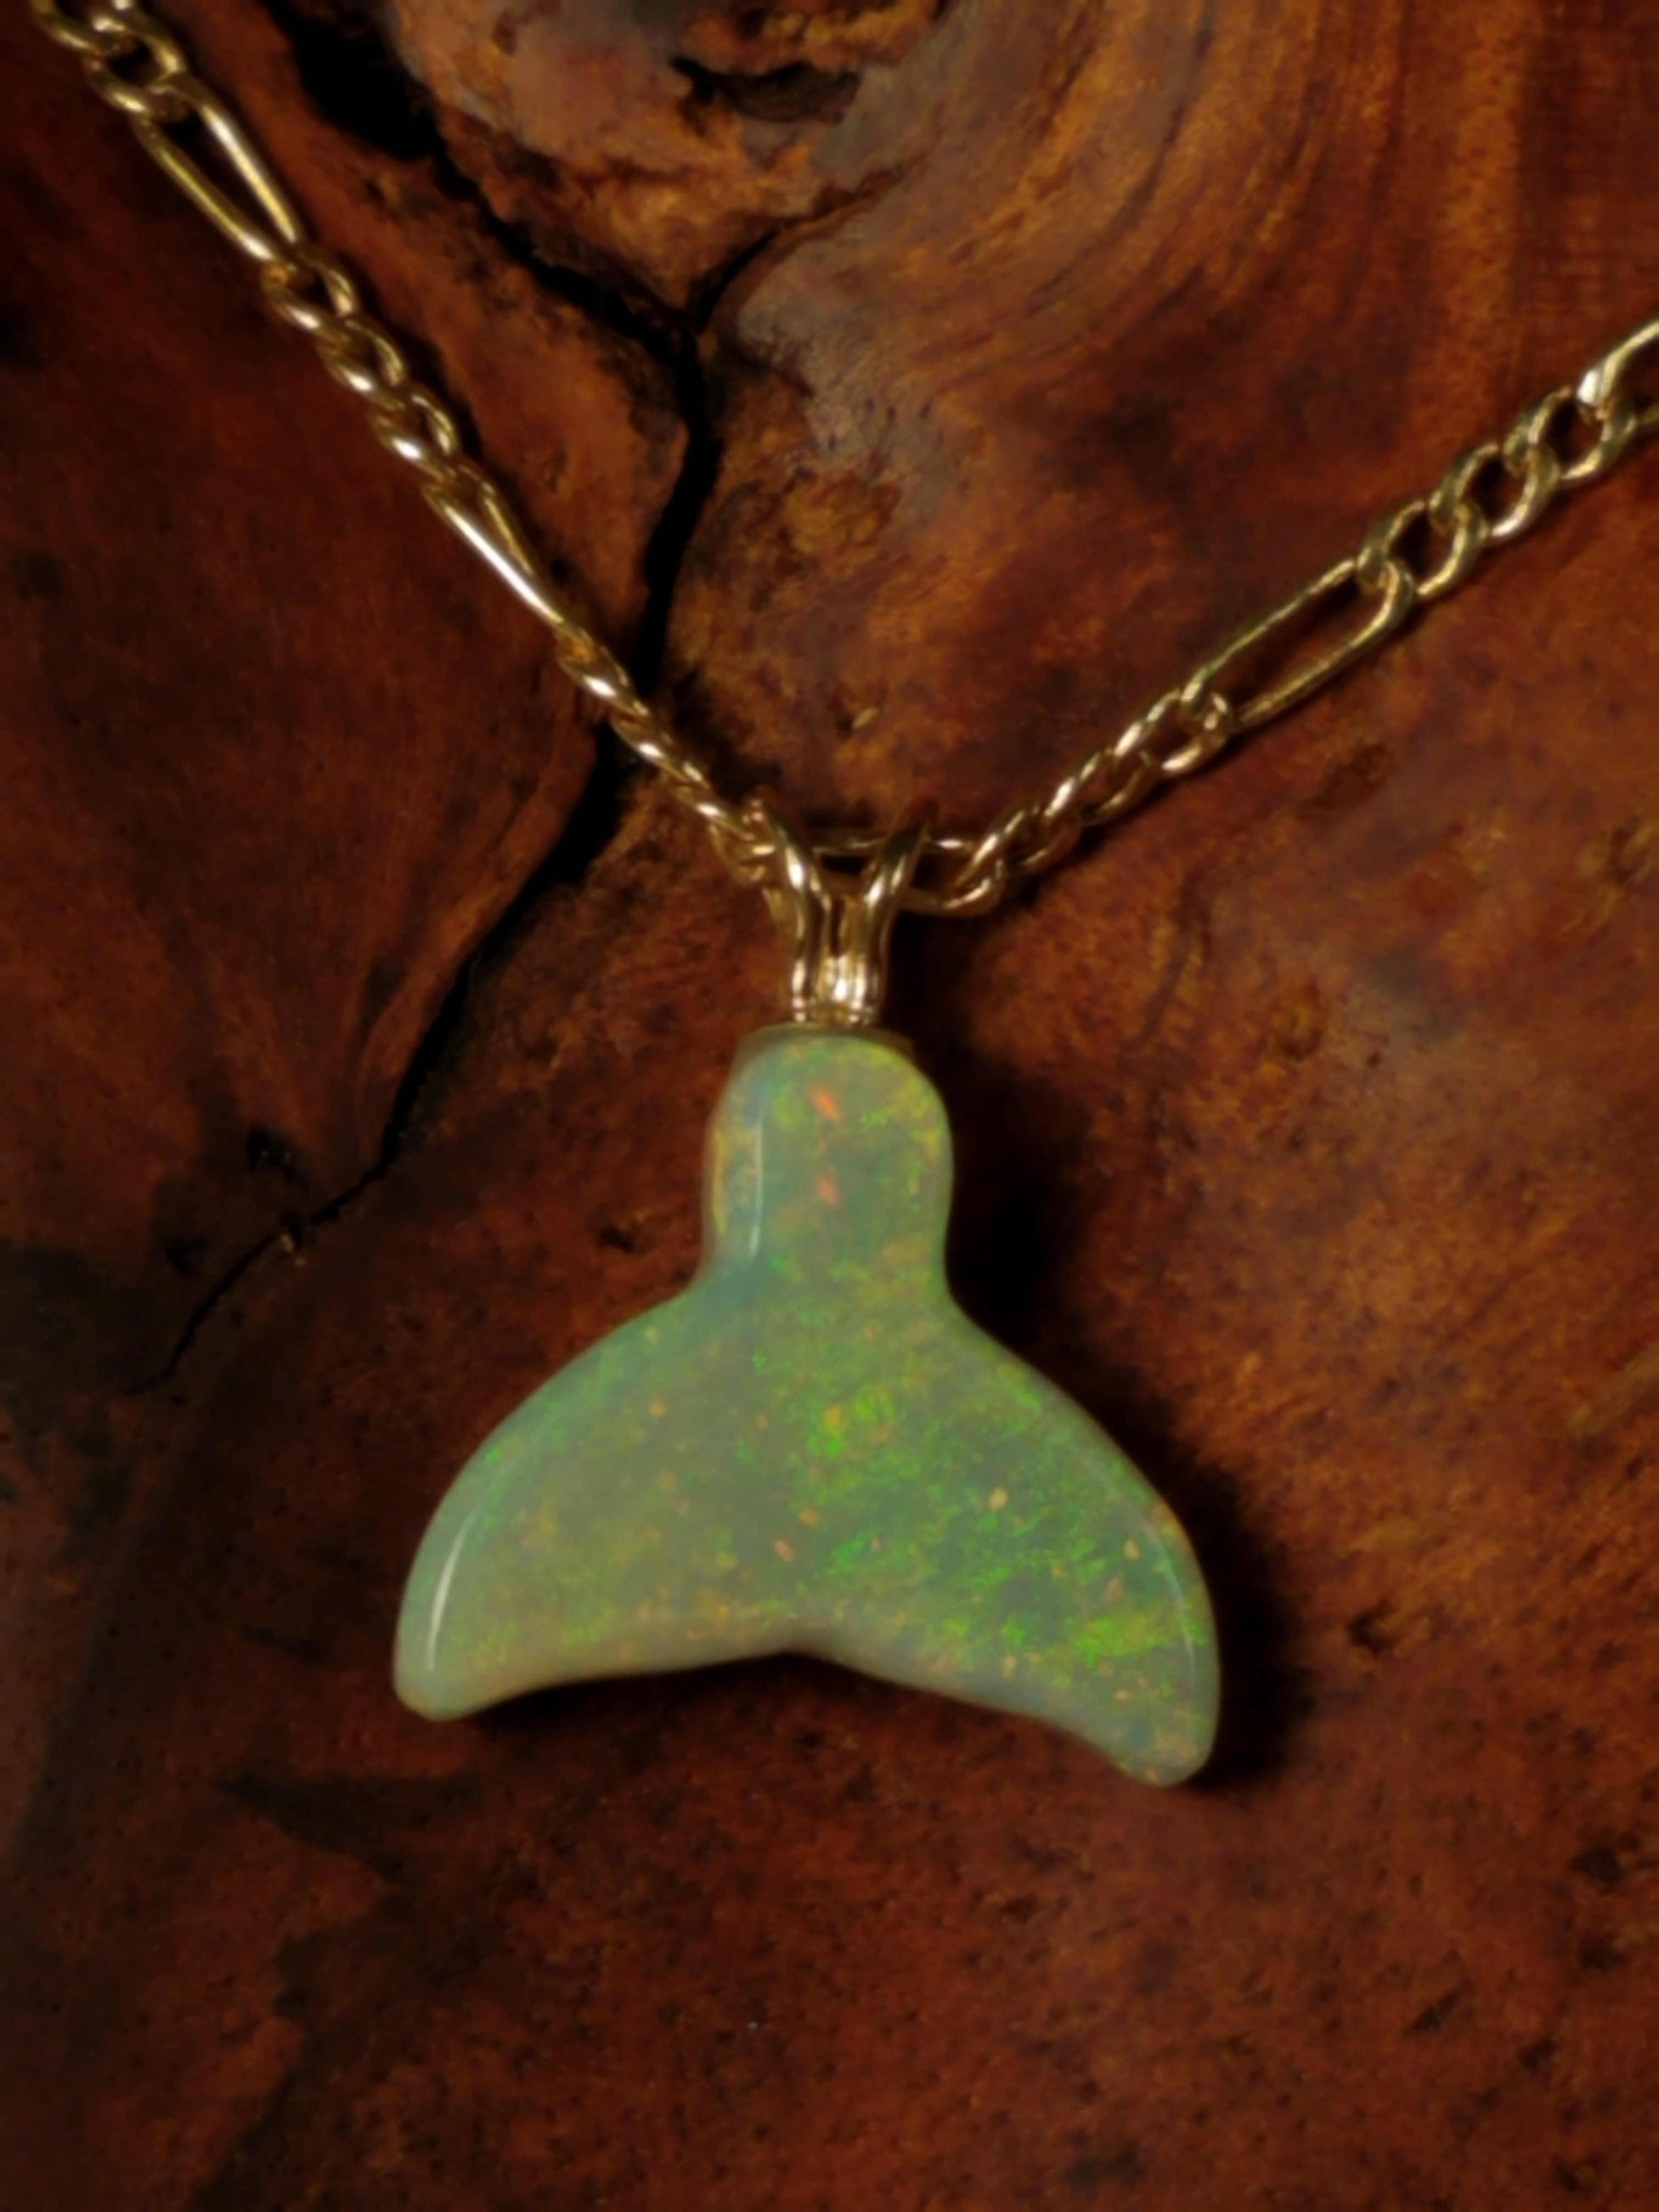 Depasquale Sculptures;  God Created Great Whales, 2018, Original Jewelry, 15 x 17 mm. Artwork description: 241 Australian Crystal Opal Whale Tail pendant.  Crystal, means you can see thru itsomewhat transparent.  Entitled And God Created Great Whales. .  Genesis 122.  Coloring is predominately, fluorescent Green luminescence, with yellow and orange, depending on the angle being viewed and amount of light upon the pendant . .  Indicative of ...